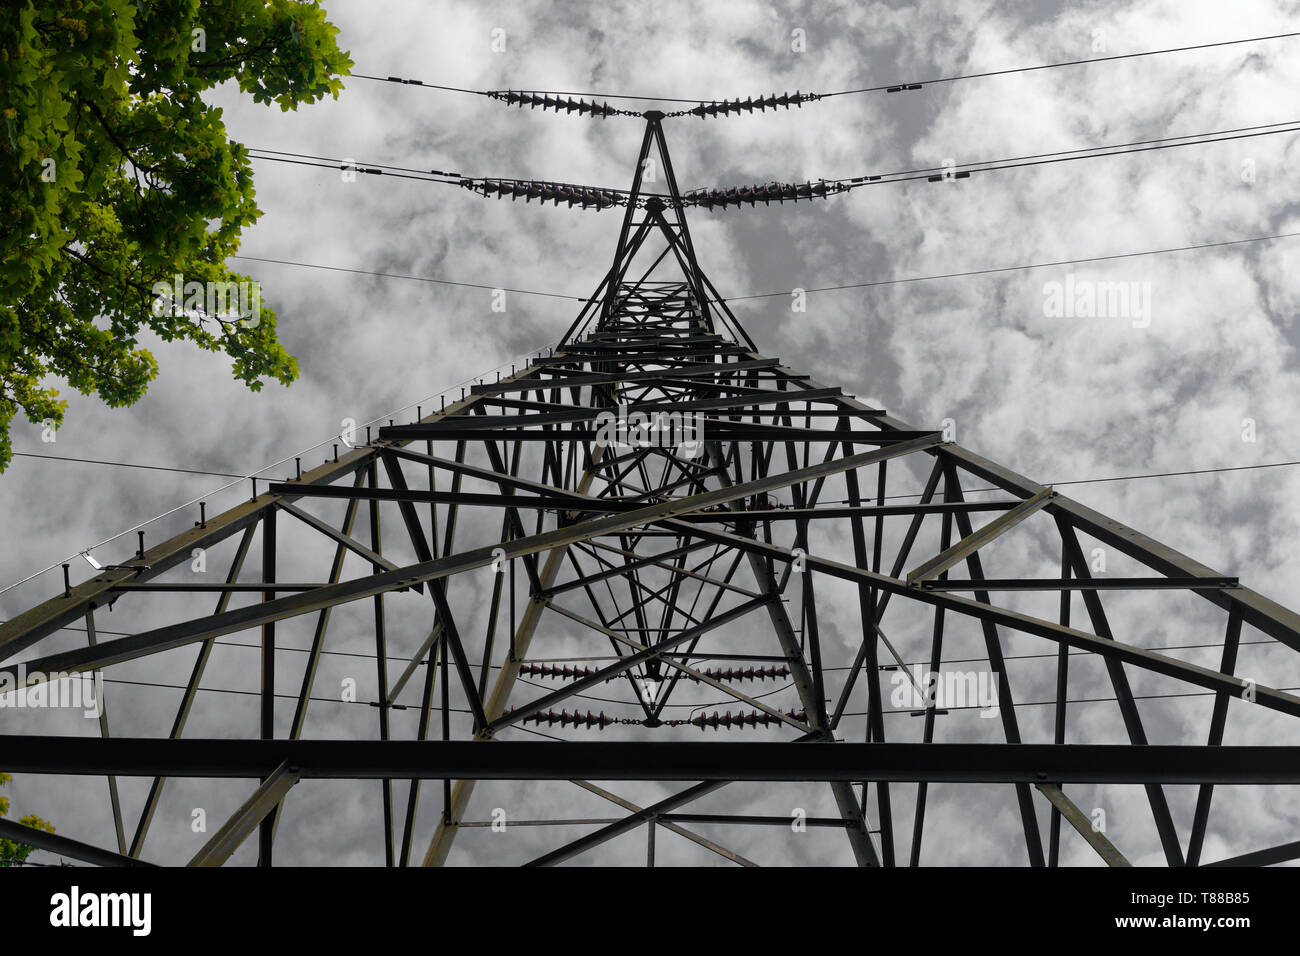 Looking up from below an electricity pylon or transmission tower Stock Photo